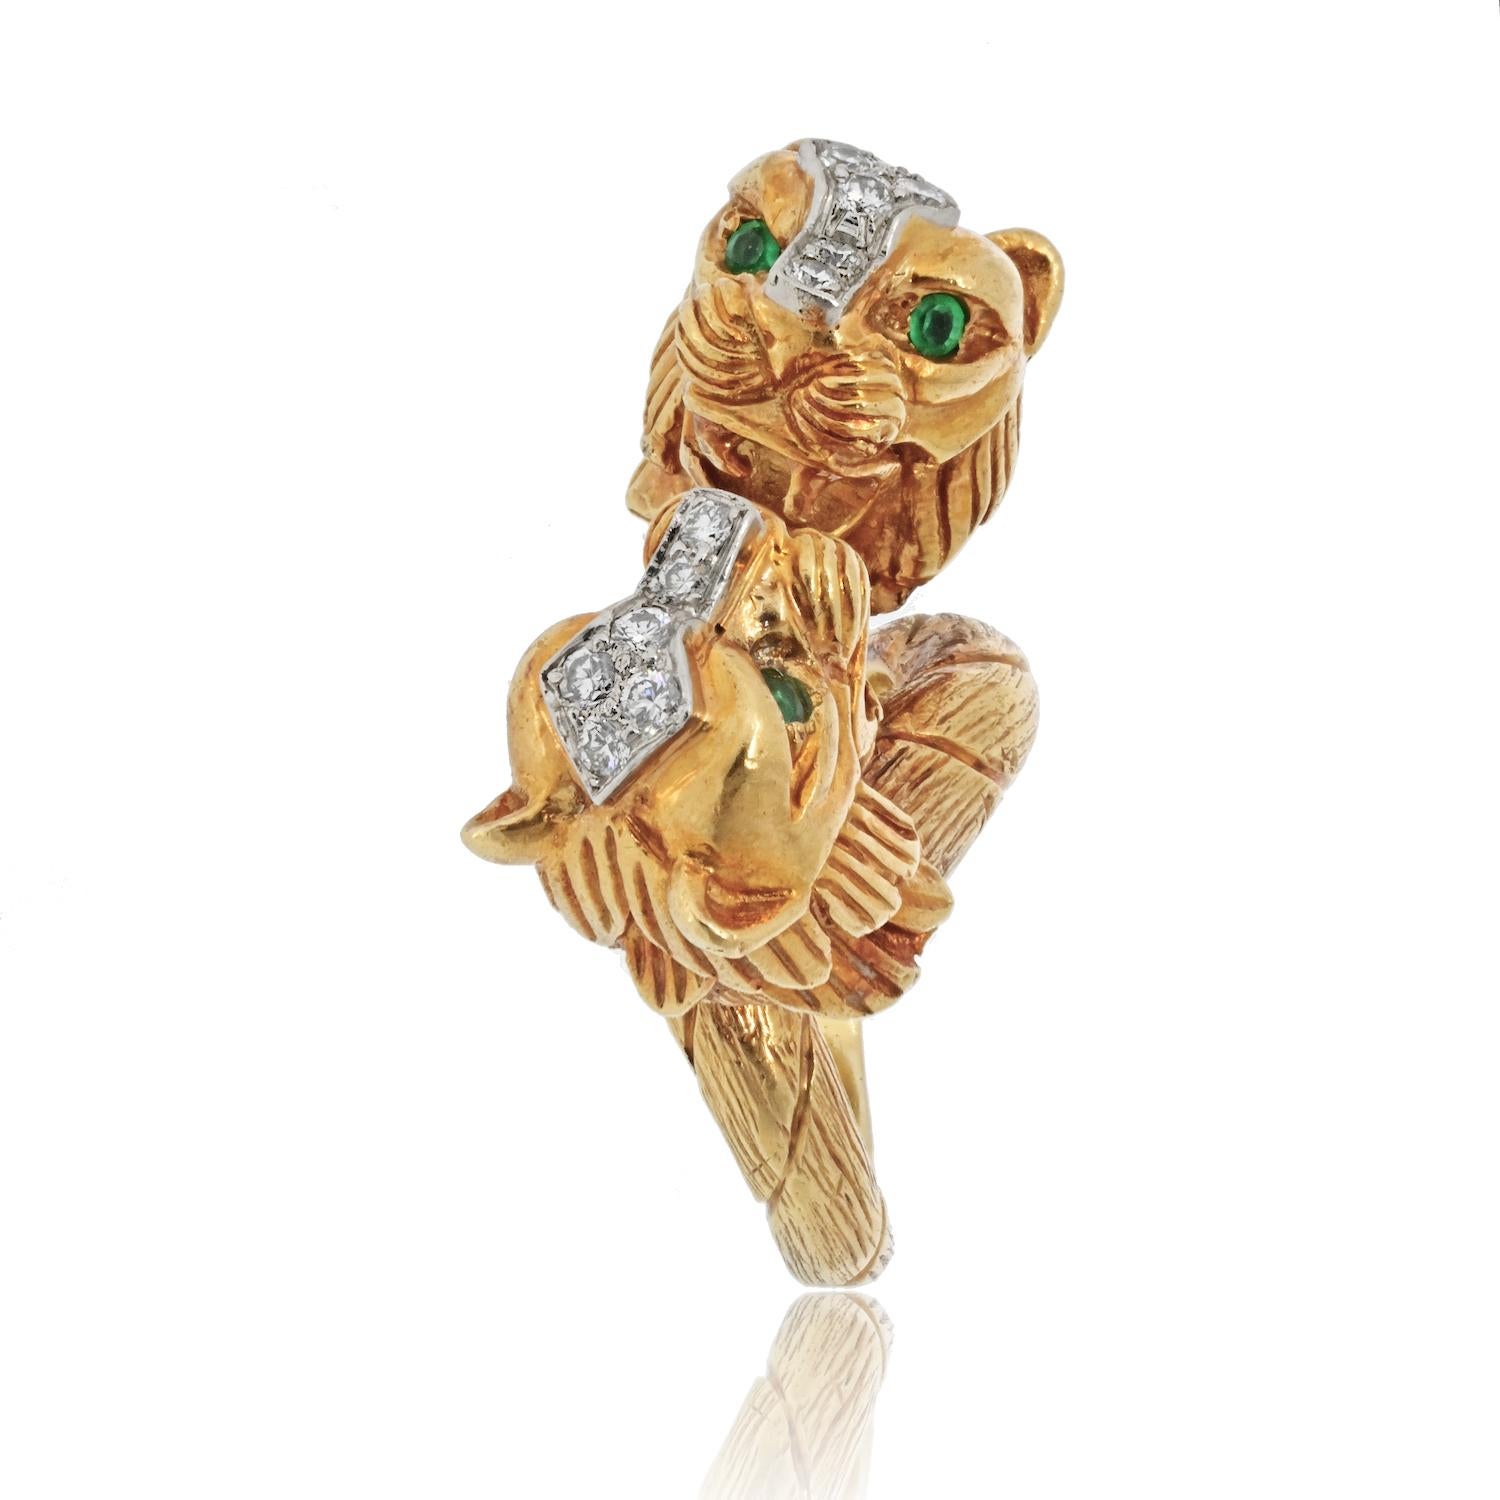 Step into the world of timeless elegance with this vintage David Webb 18k yellow gold double head lion ring. Featuring two majestic lions facing each other, this ring exudes strength and sophistication. The lions are adorned with mesmerizing green